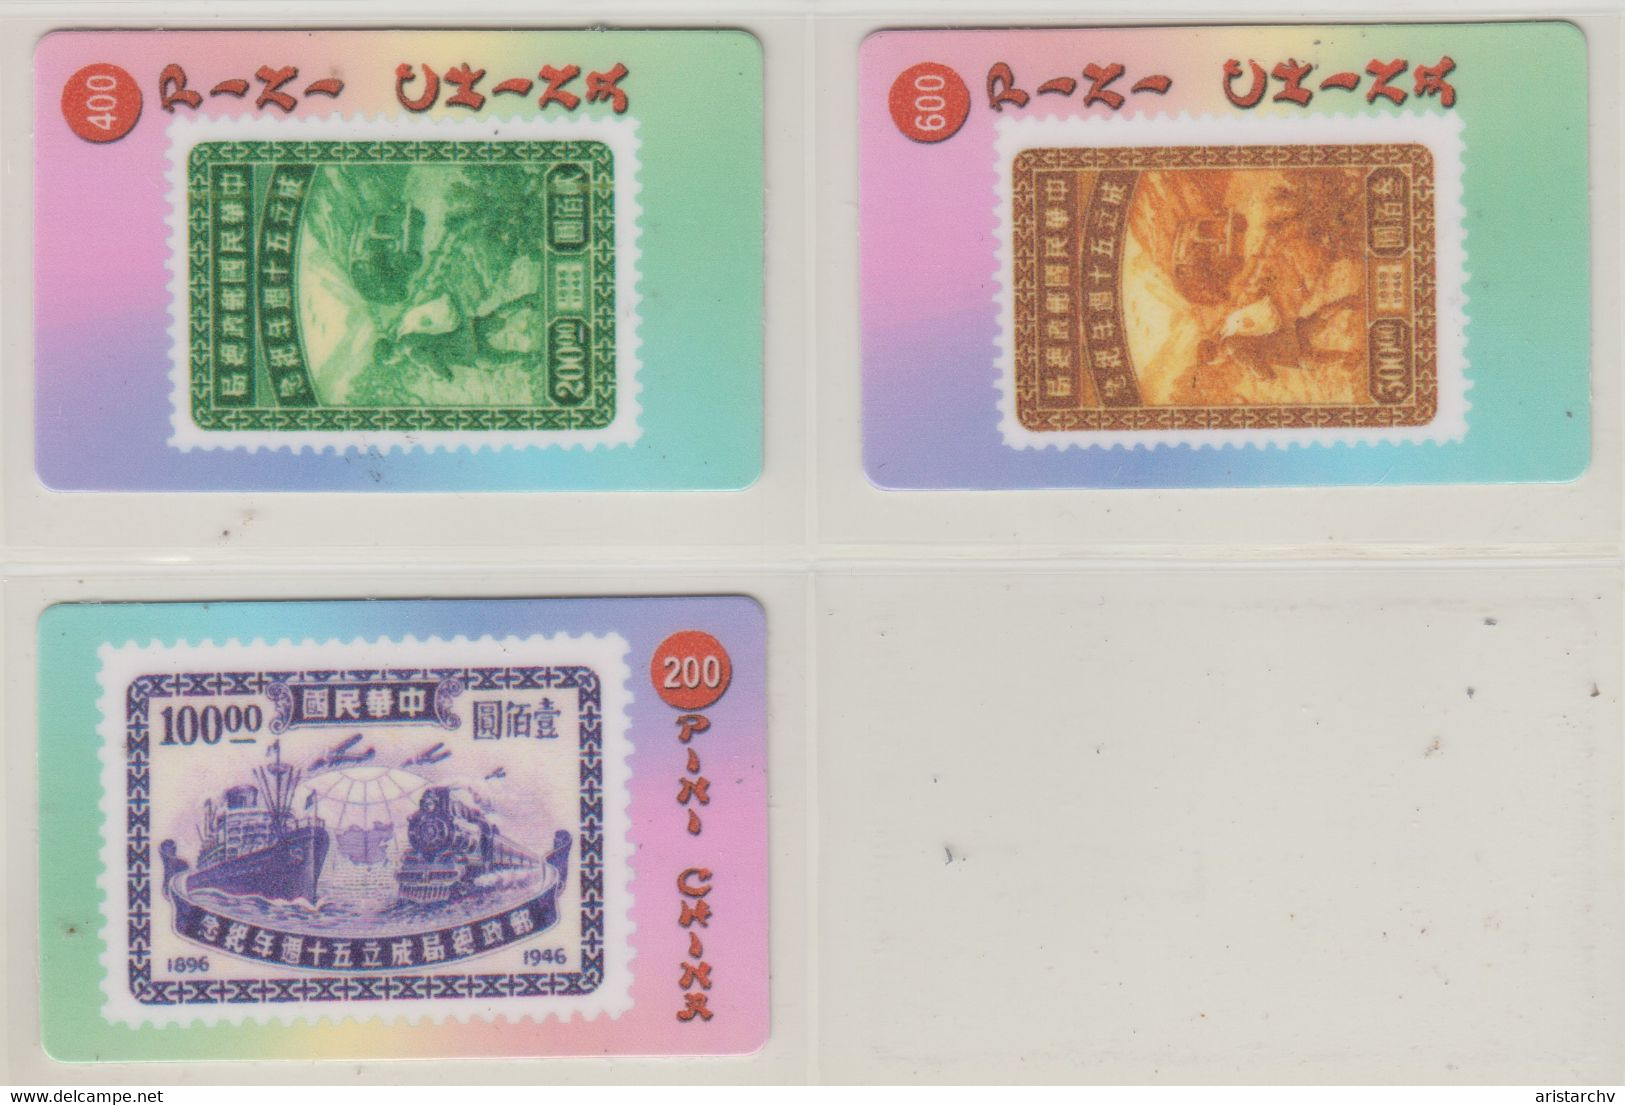 CHINA STAMPS ON PHONE CARDS SET OF 3 CARDS - Sellos & Monedas